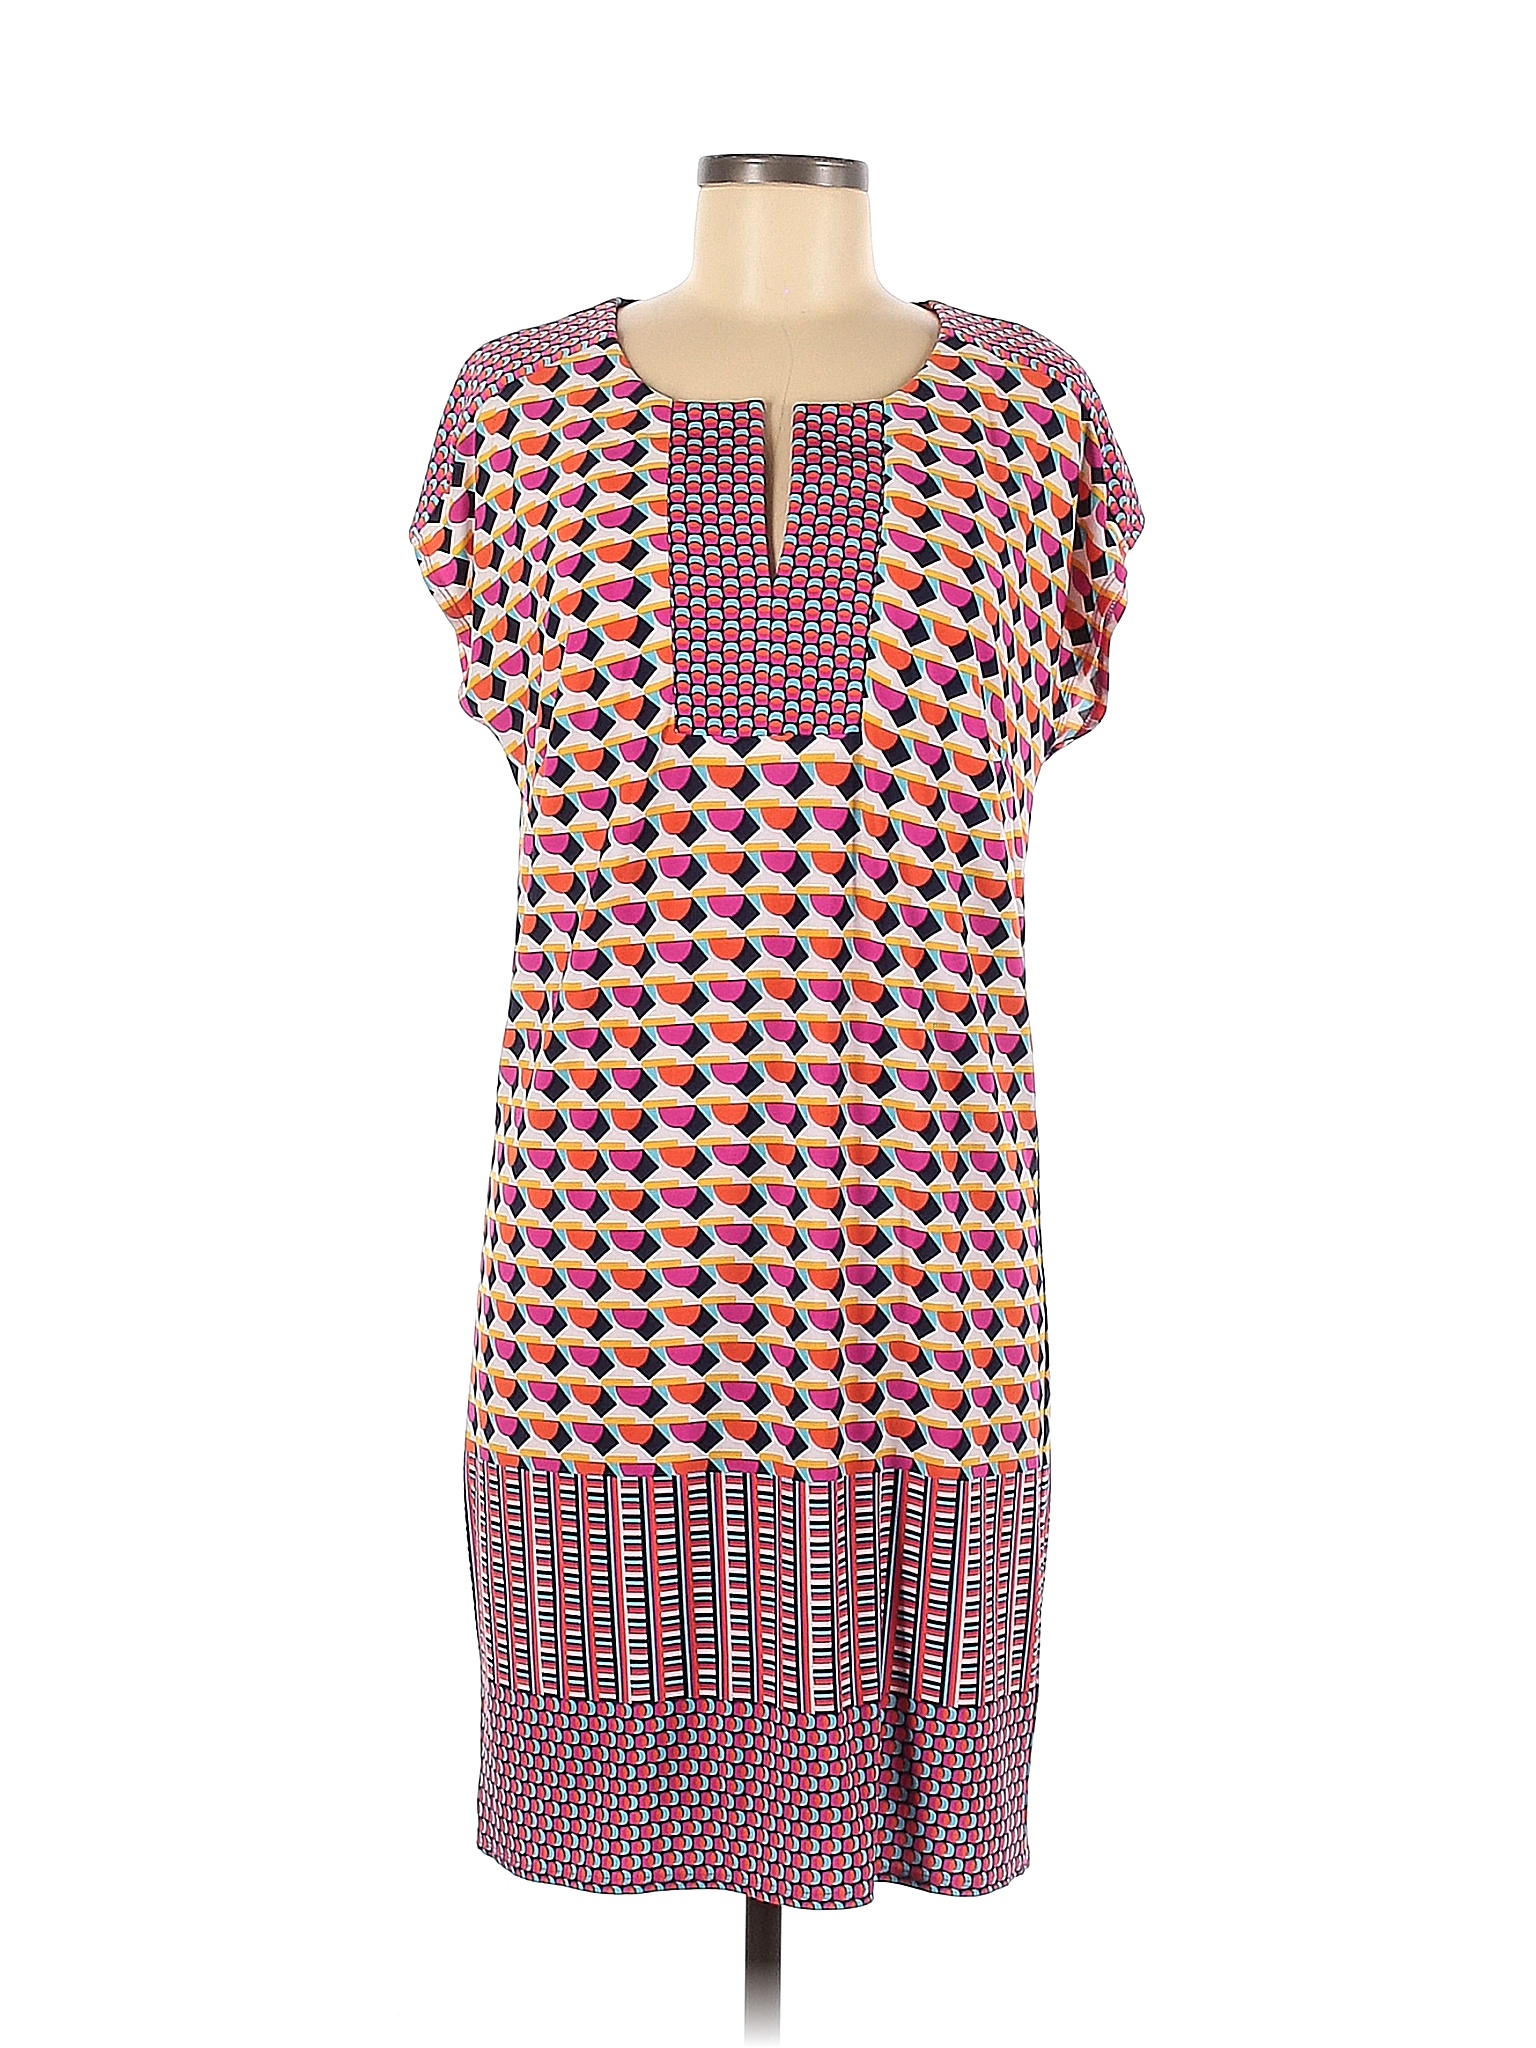 Laundry by Shelli Segal Multi Color Pink Casual Dress Size M - 88% off ...